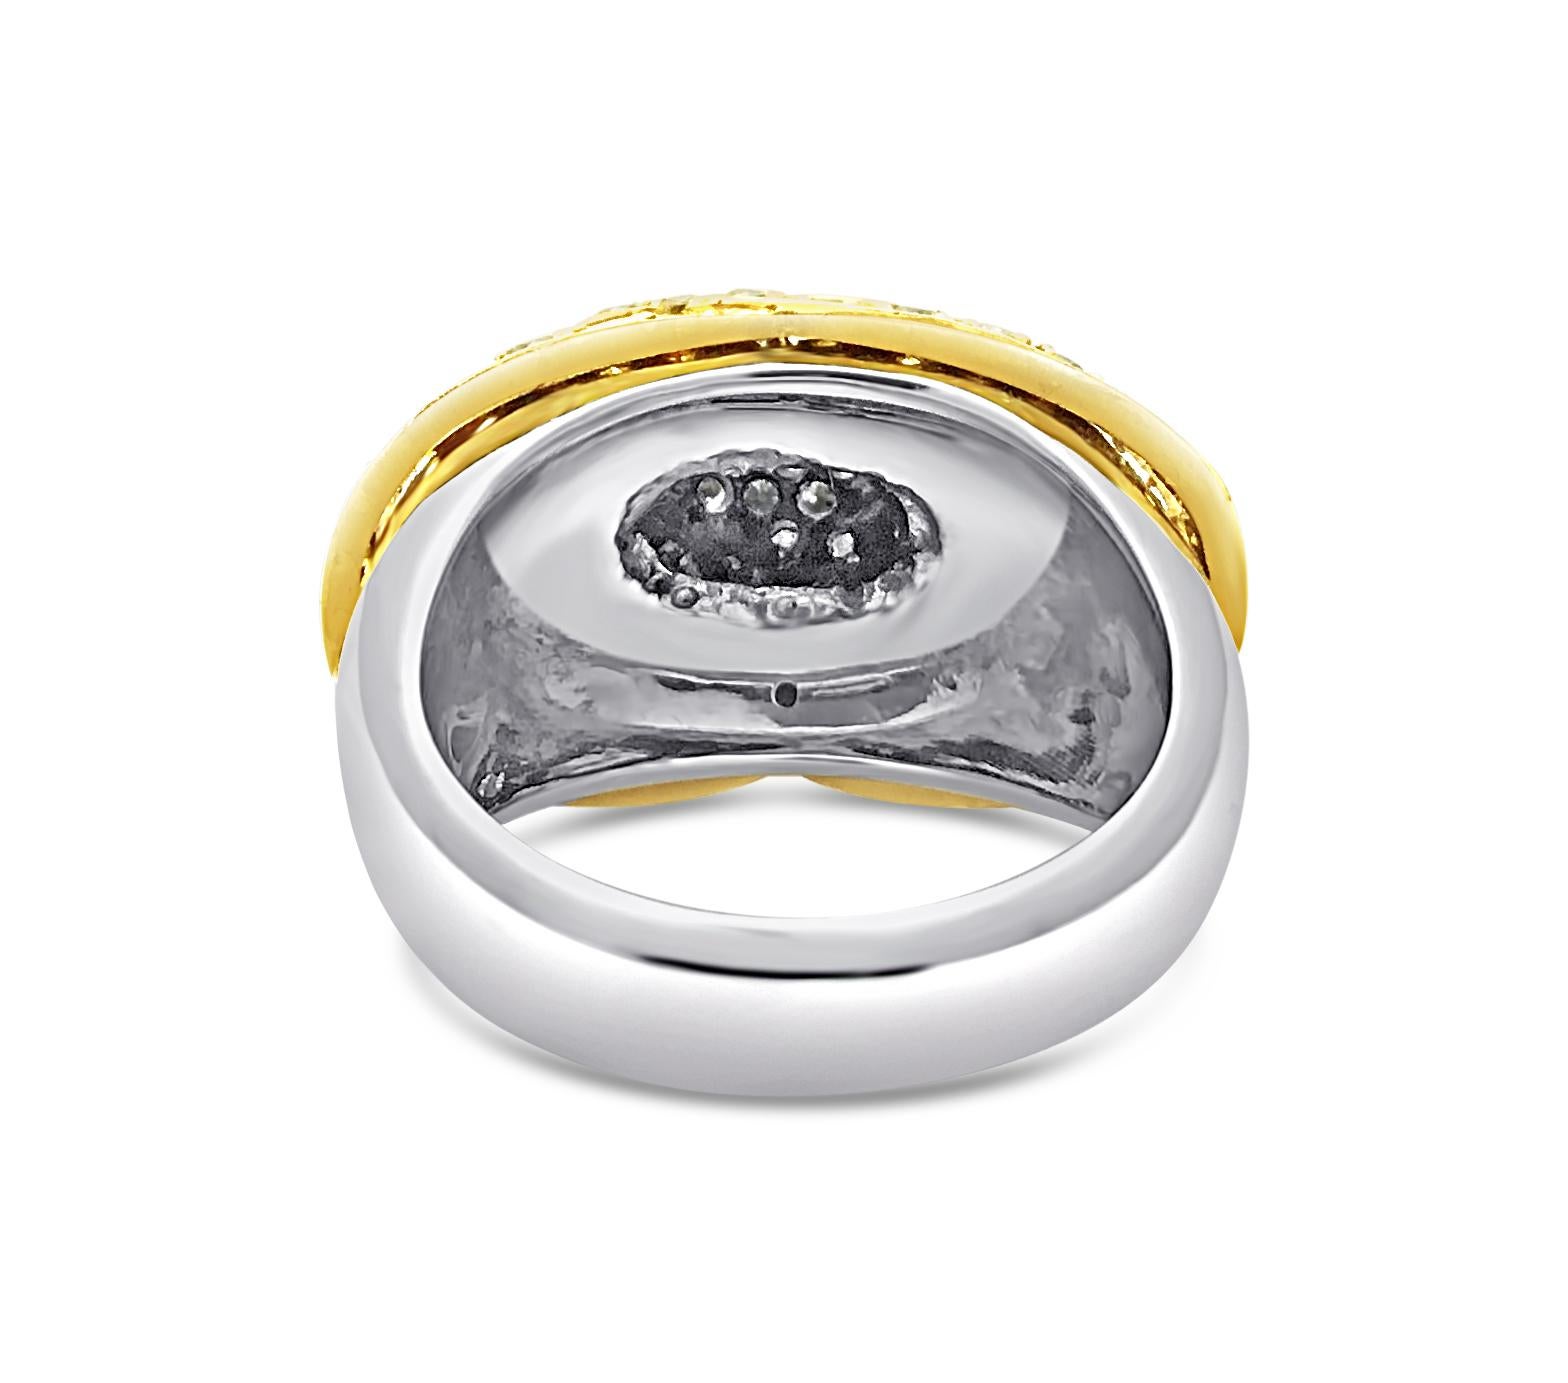 For Sale:  Fancy and colorless diamonds pavè engagement wedding ring 6